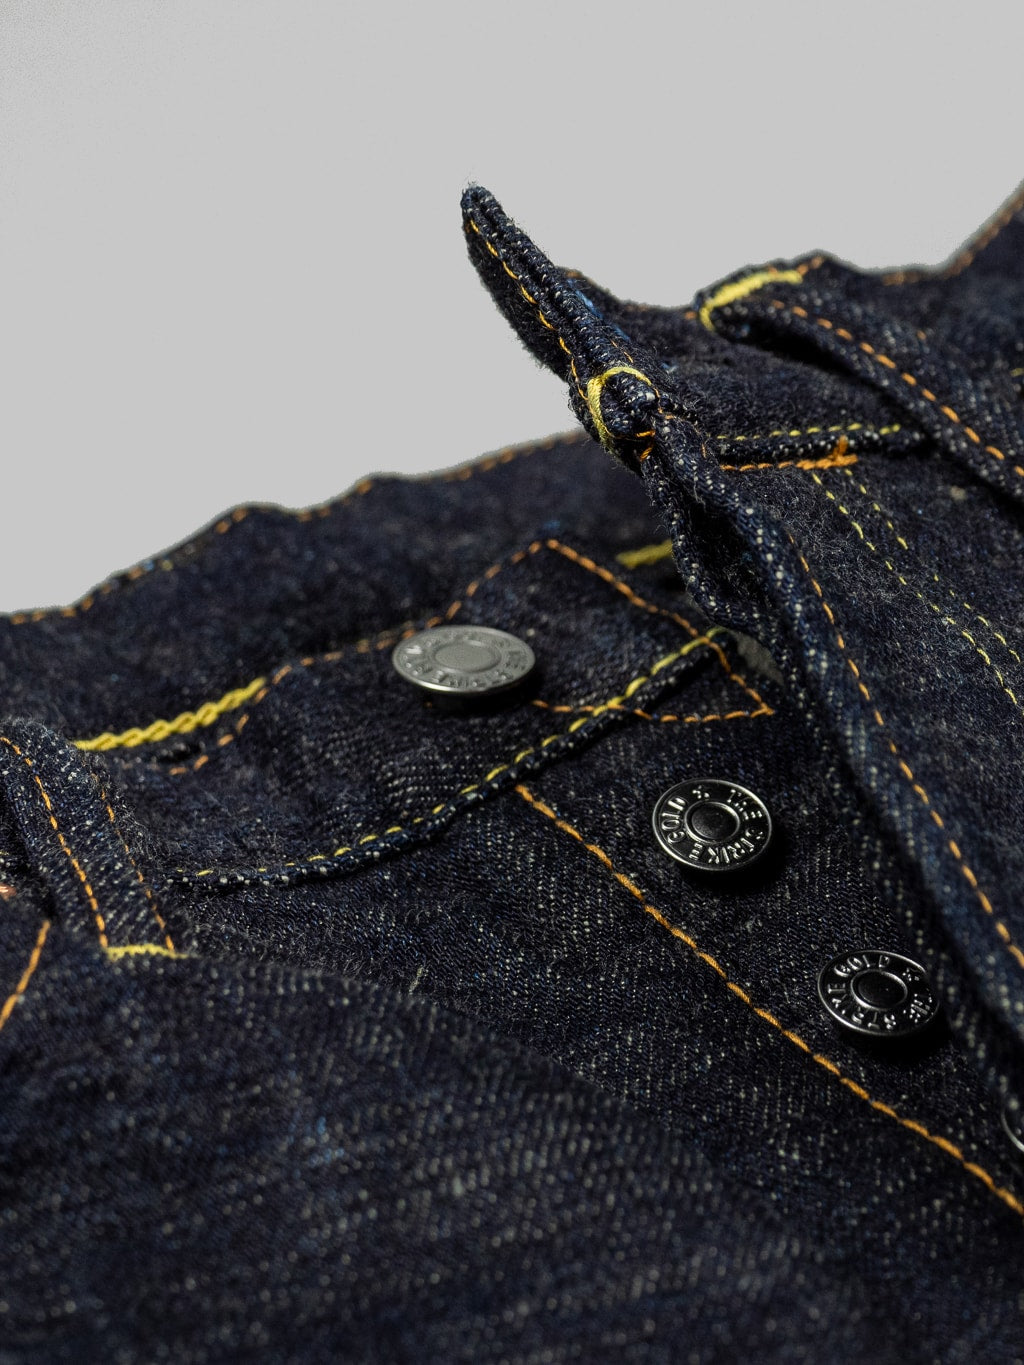 The Strike Gold Slub Weft Slim Jeans fit buttons